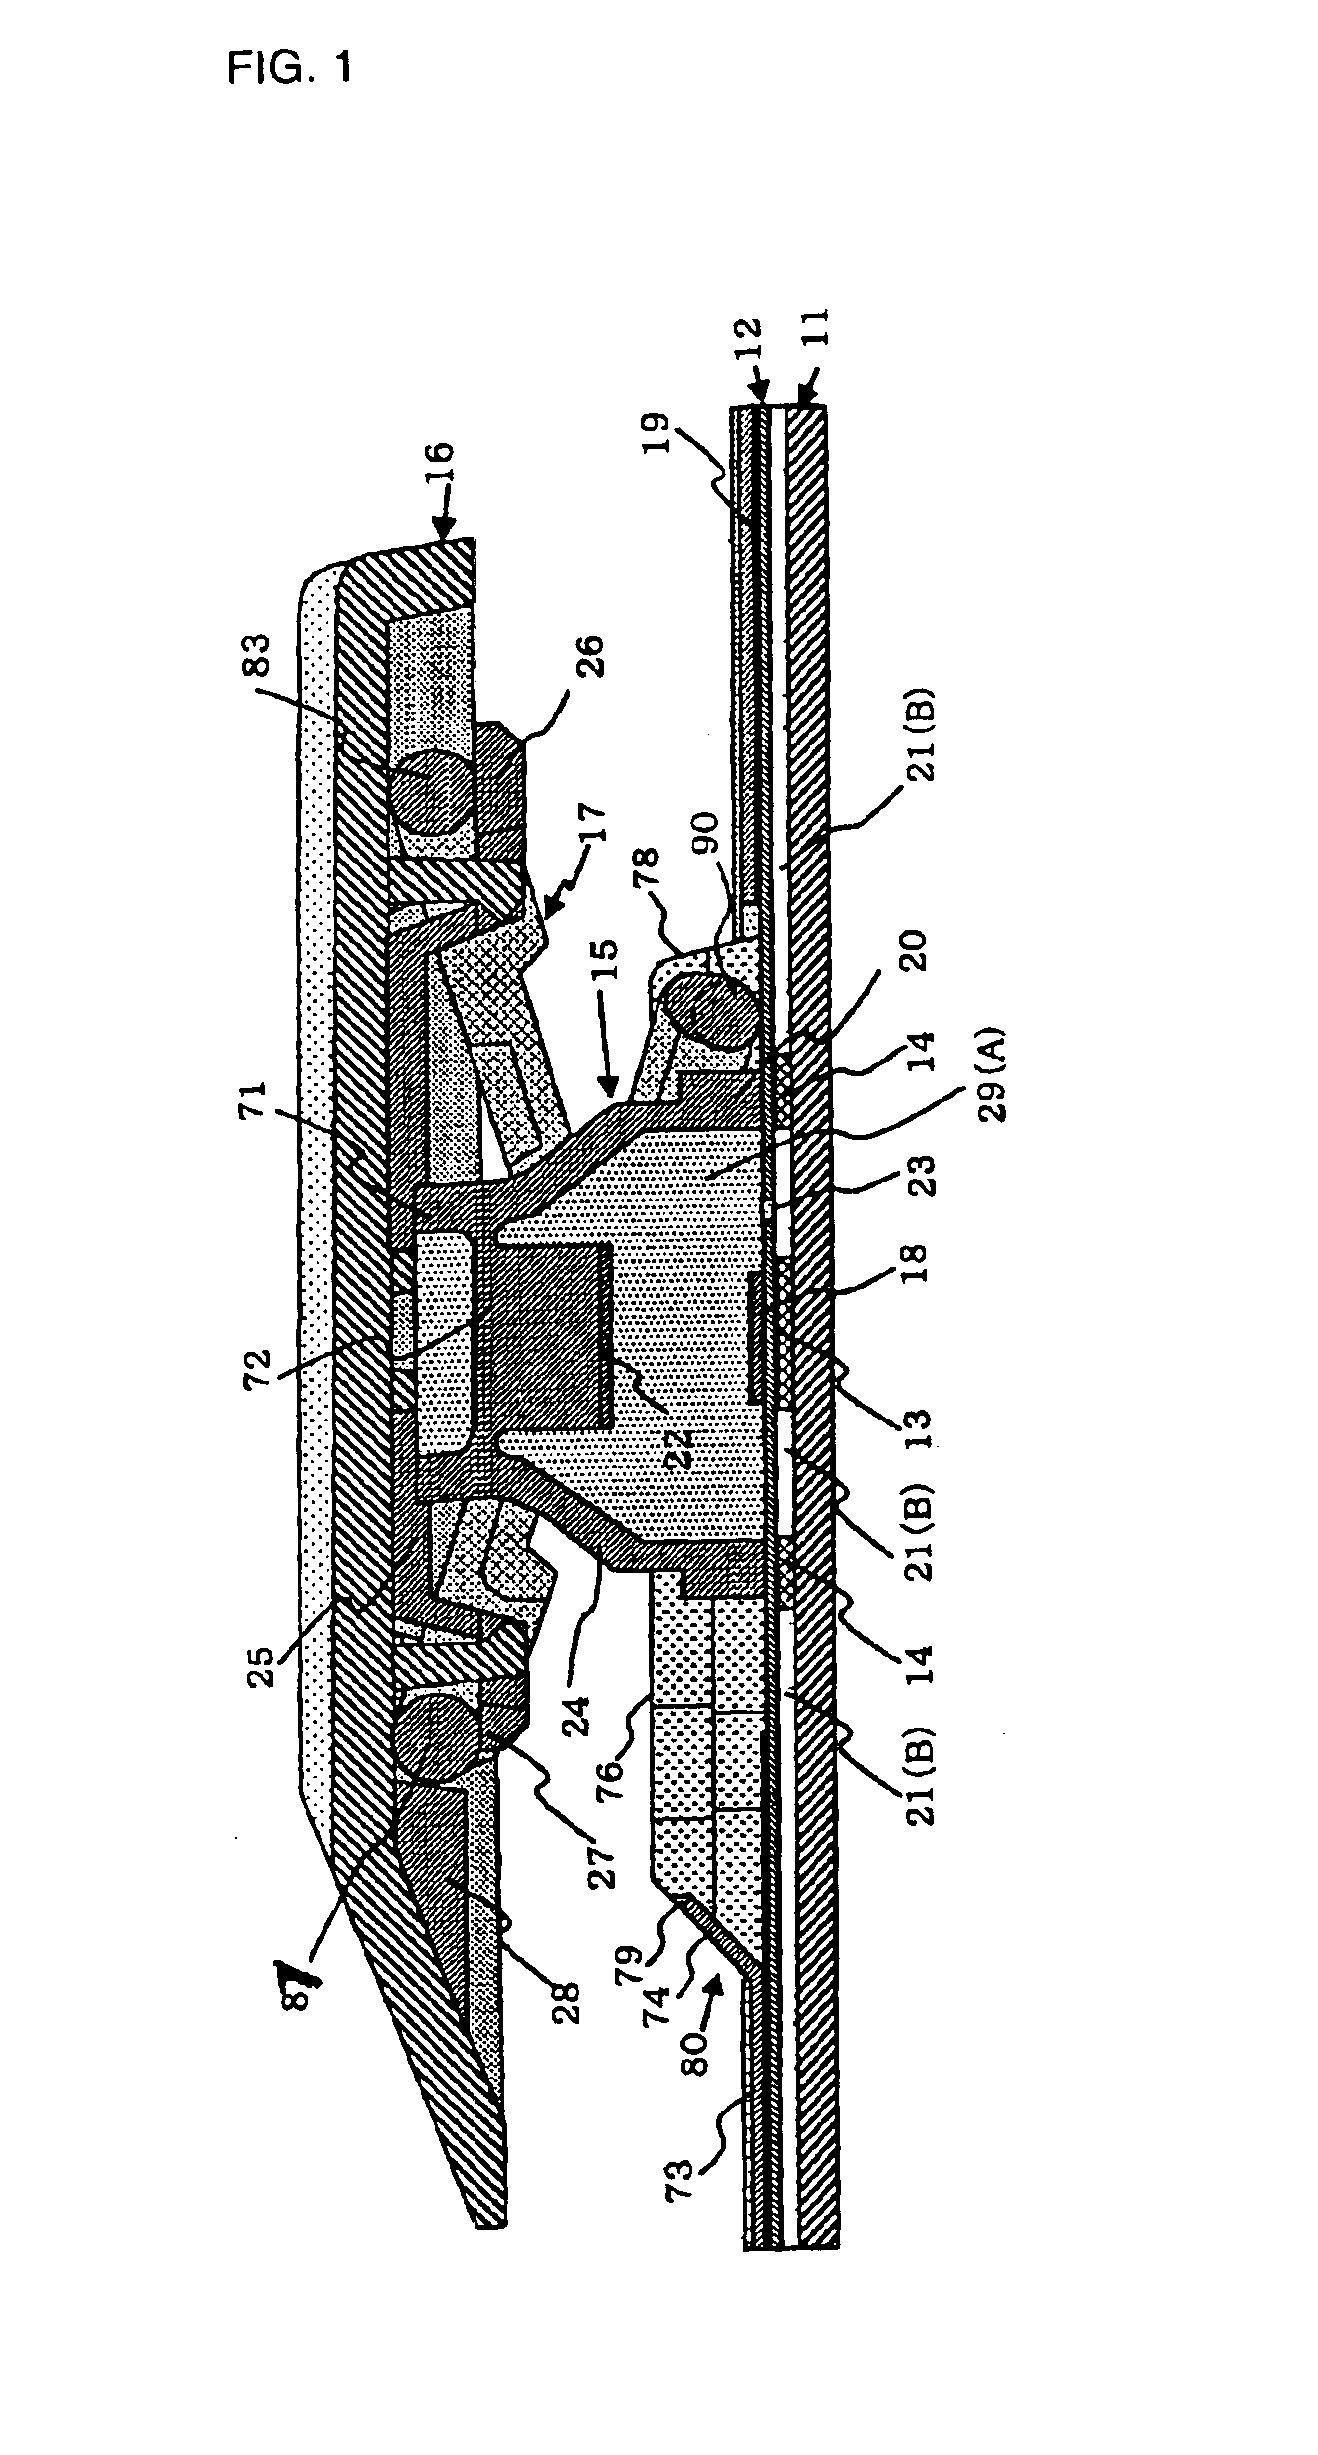 Keyboard switch with internal fluid containment network